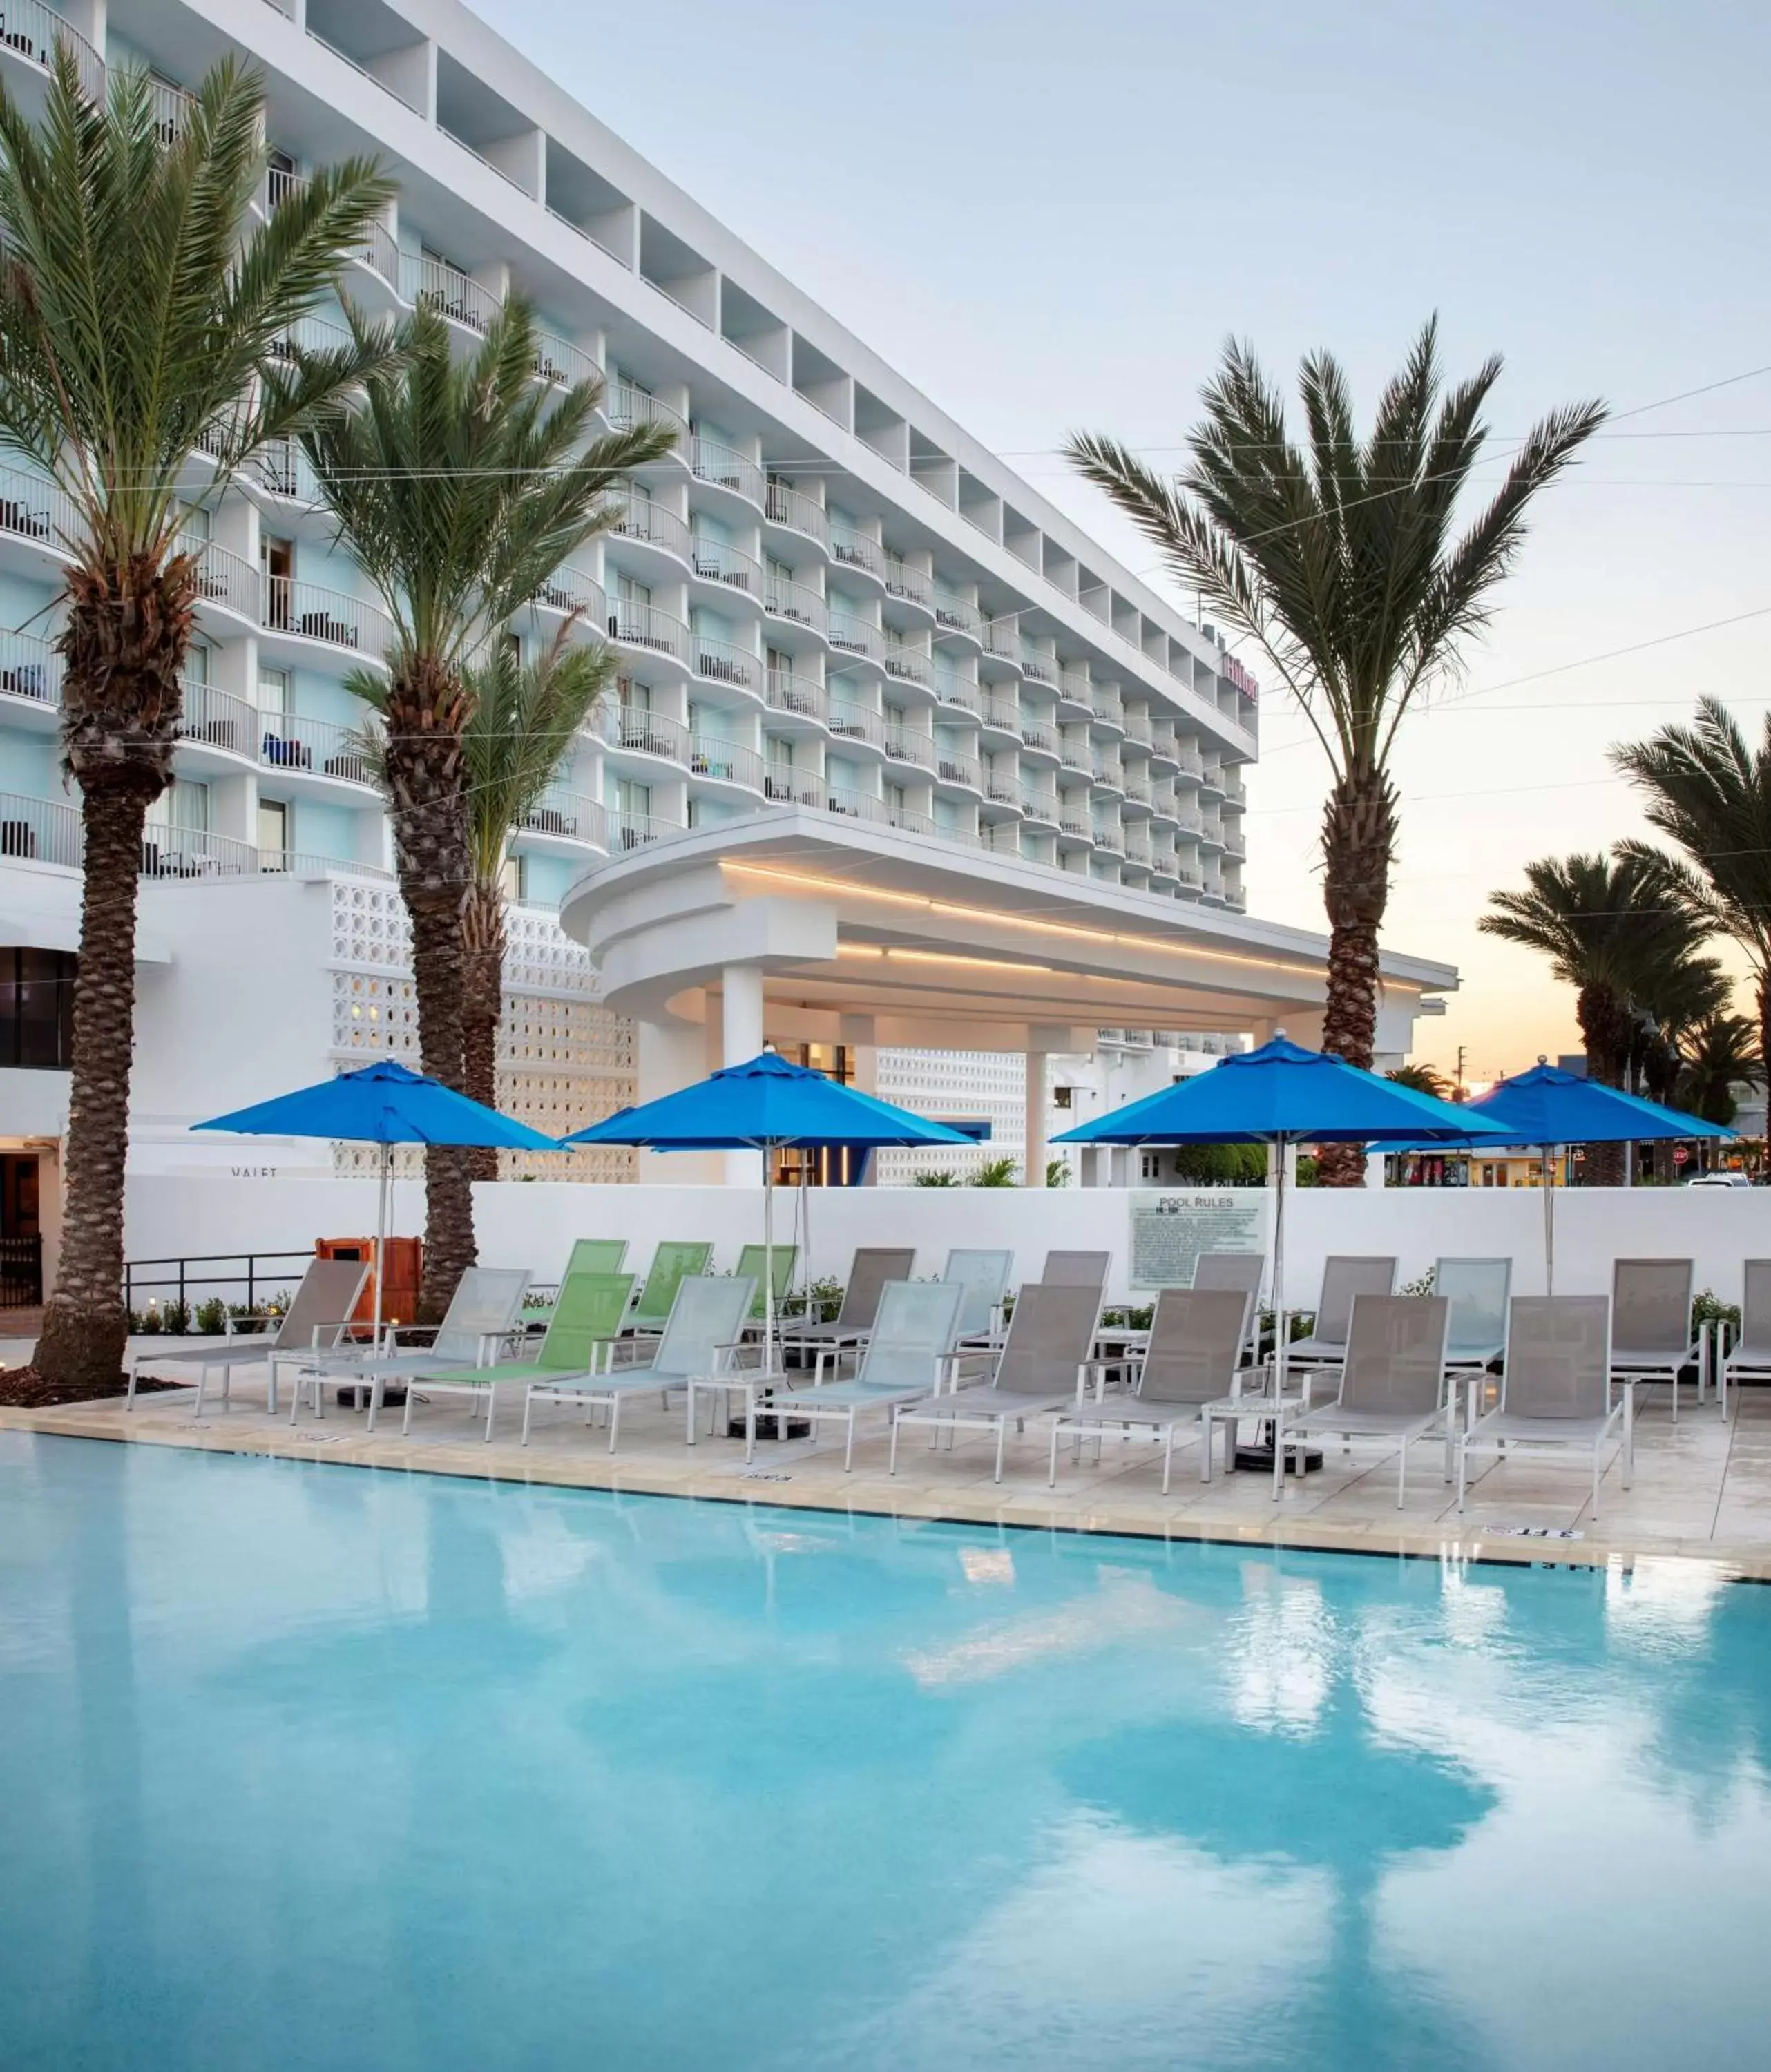 Property building, Swimming Pool in Hilton Clearwater Beach Resort & Spa